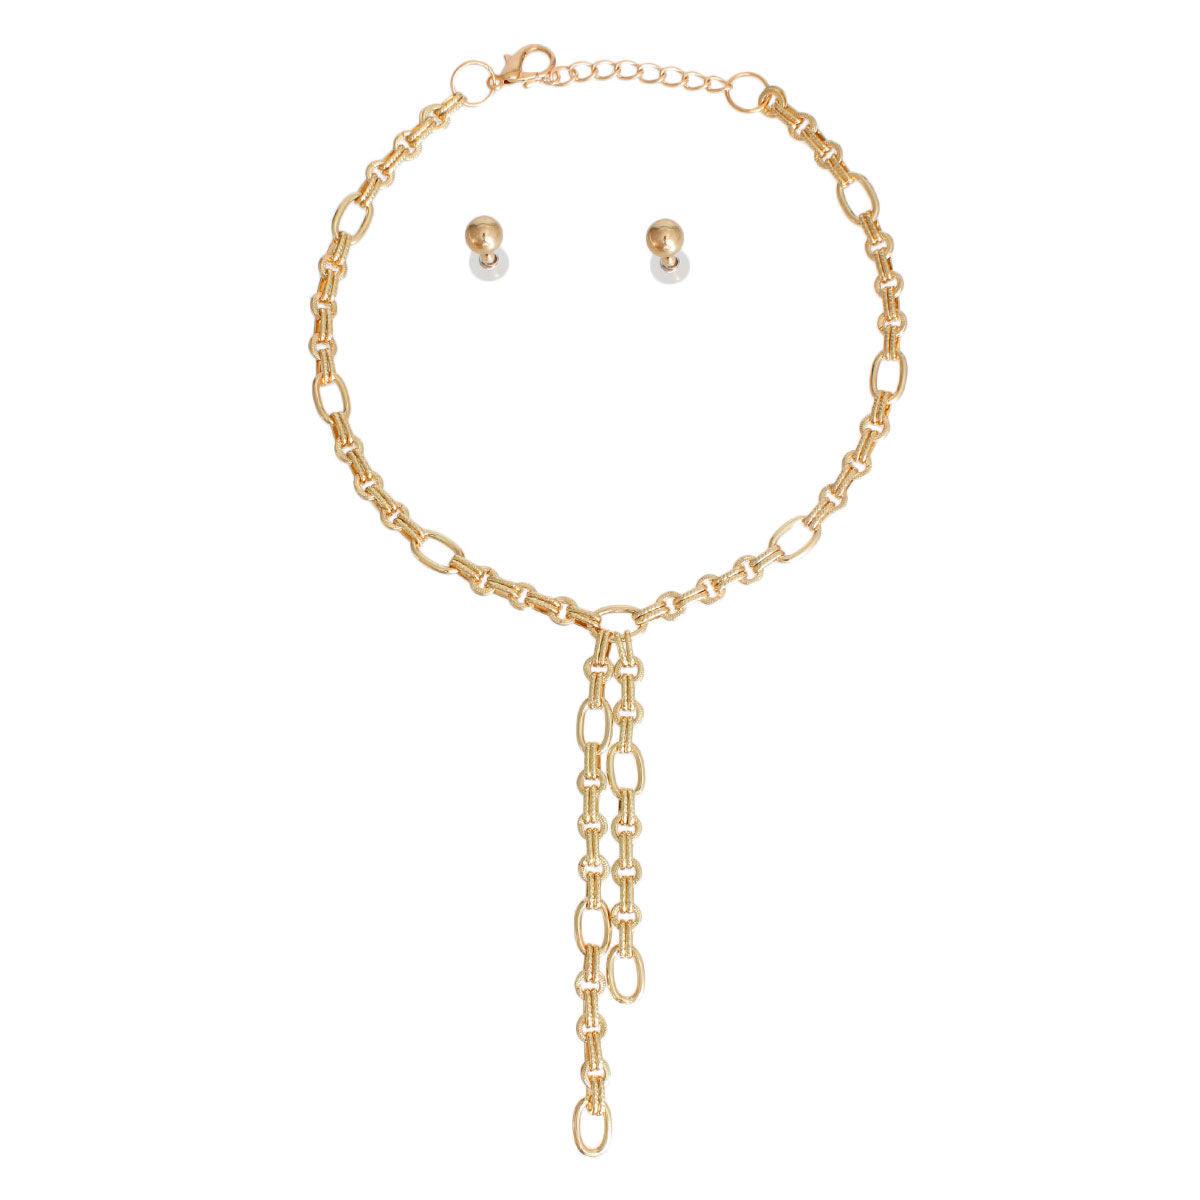 Shop Cool Style Gold Finish Lariat Necklace Set - Limited Stock!